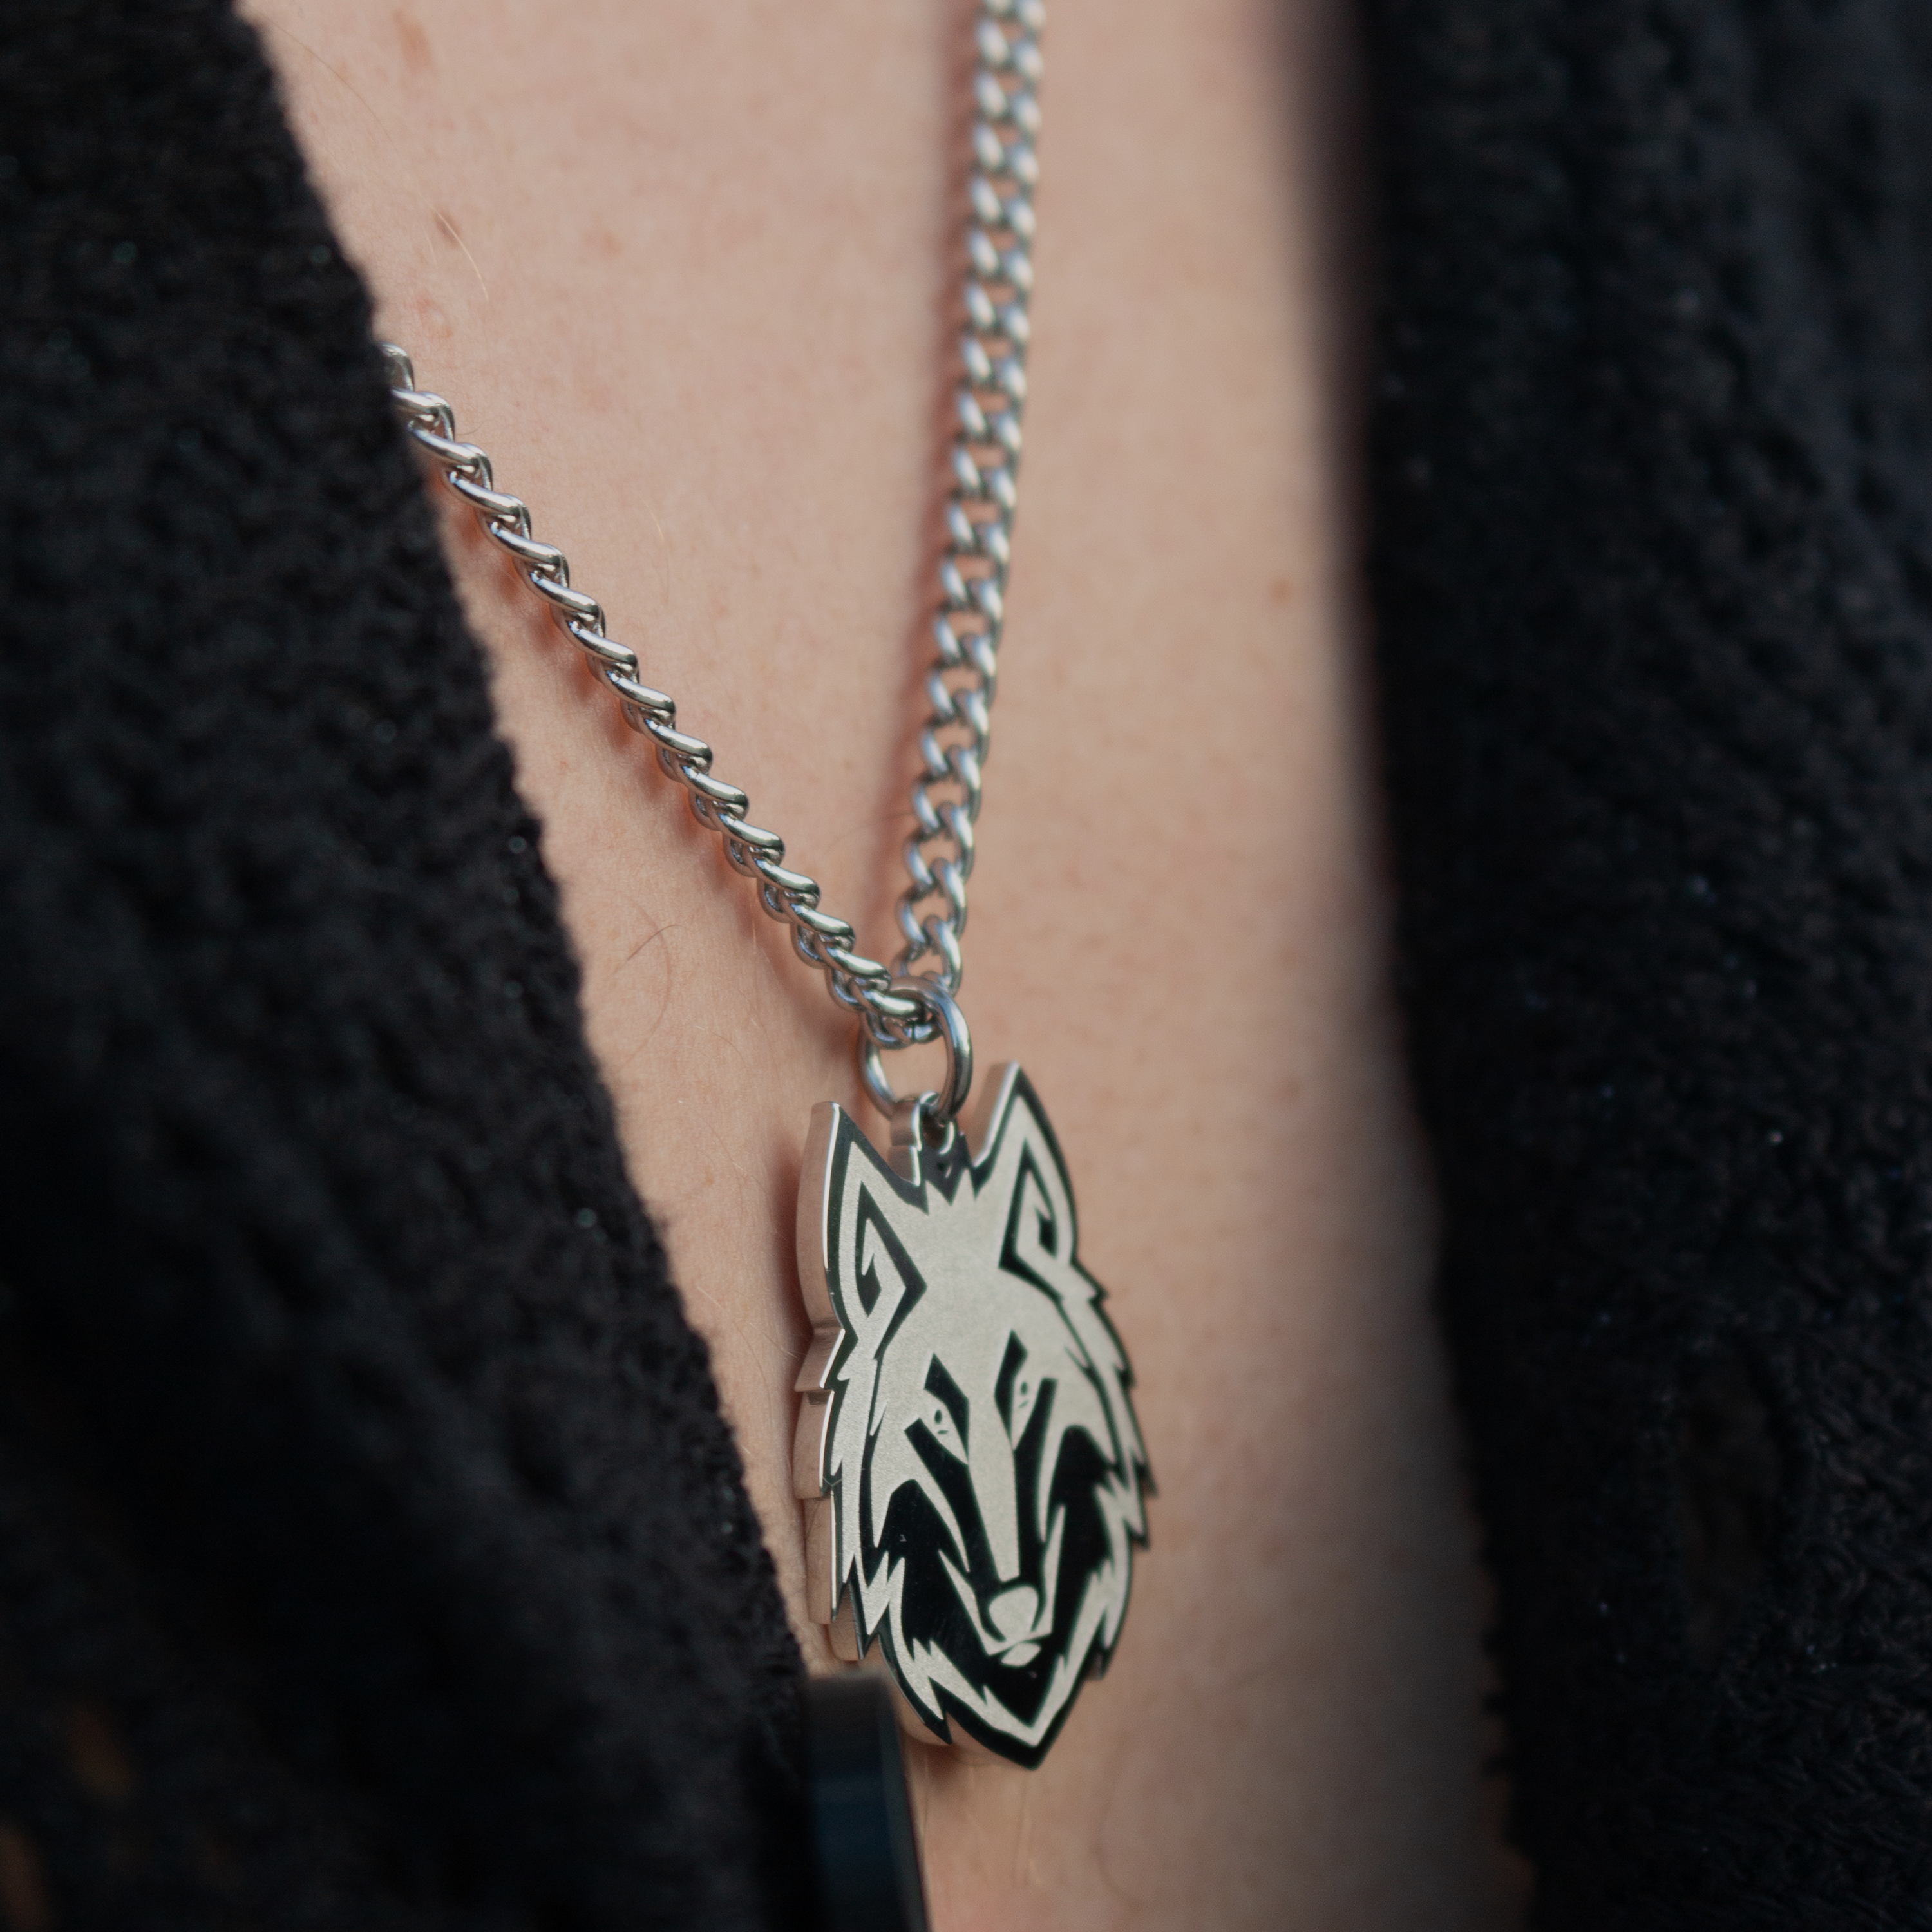 WOLF NECKLACE - SILVER